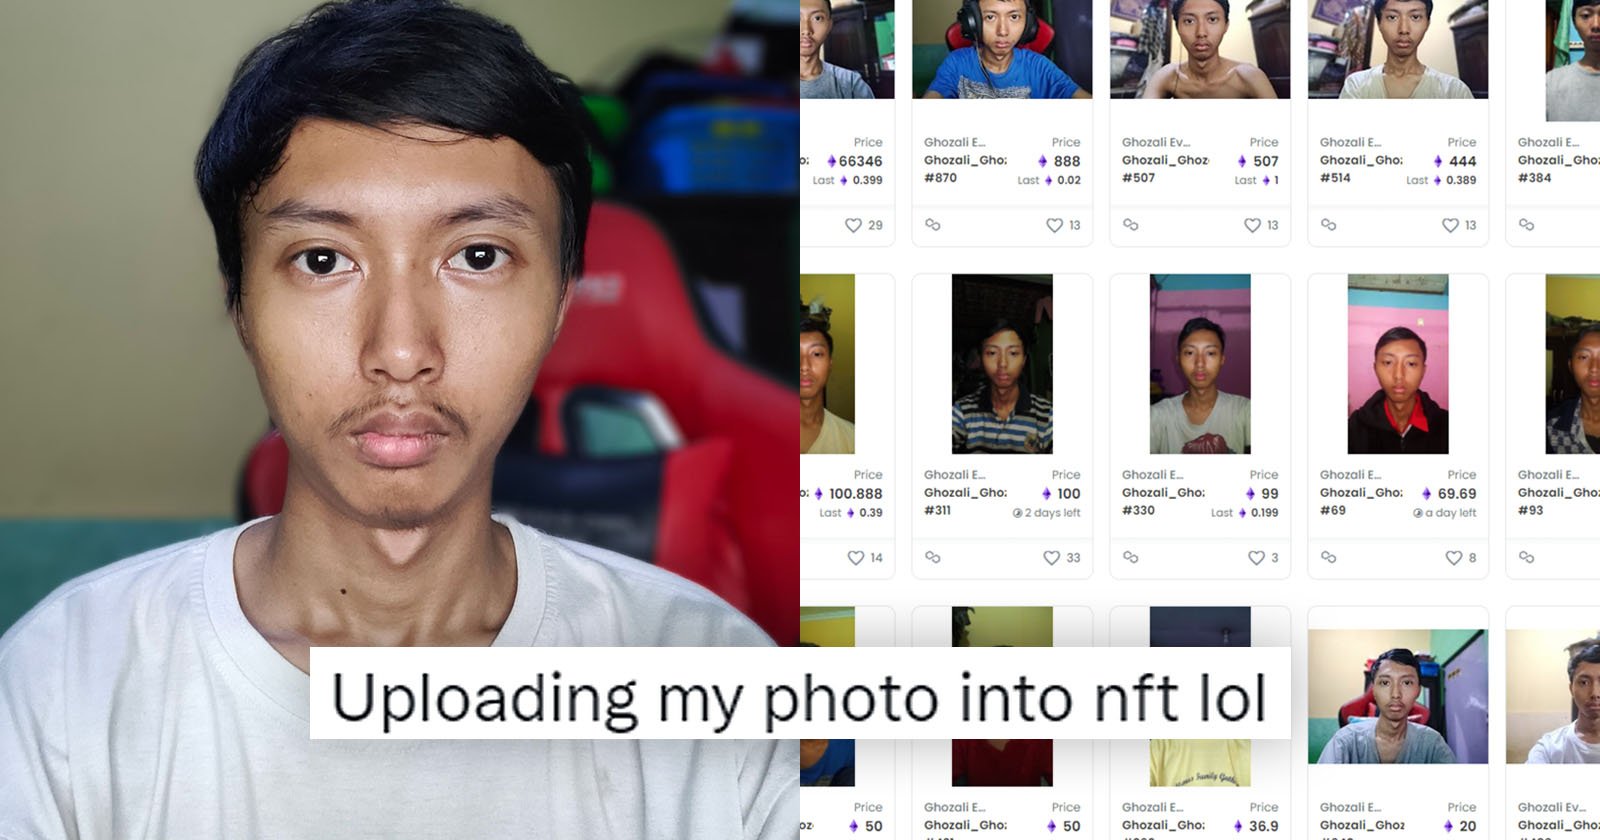 Student Becomes a Millionaire After Turning Selfies Into NFTs as a Joke |  PetaPixel